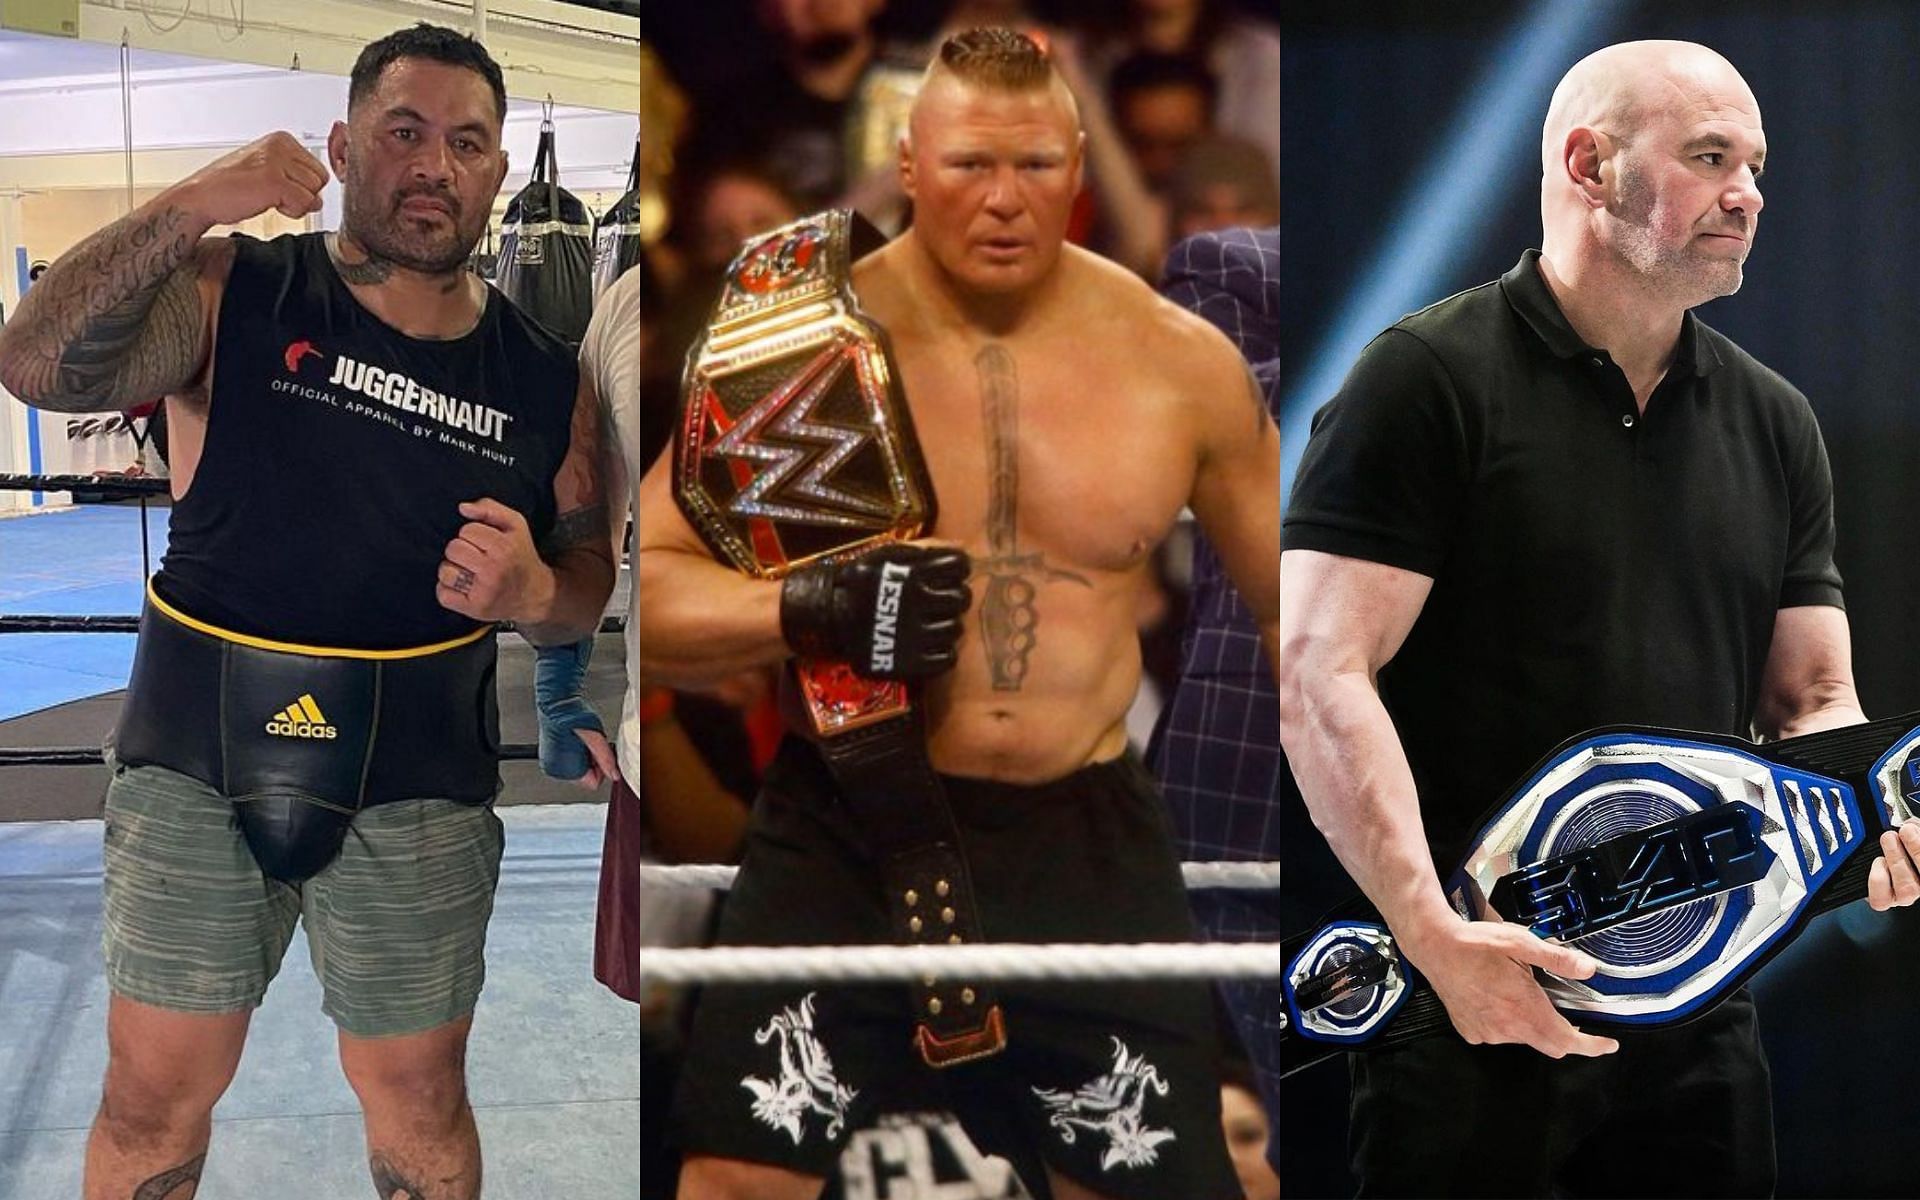 Mark Hunt (left) blasts Brock Lesnar (middle) and Dana White (right) for their legal troubles [Images courtesy @markhuntfighter74 and @danawhite on Instagram and @HeymanHustle on X]